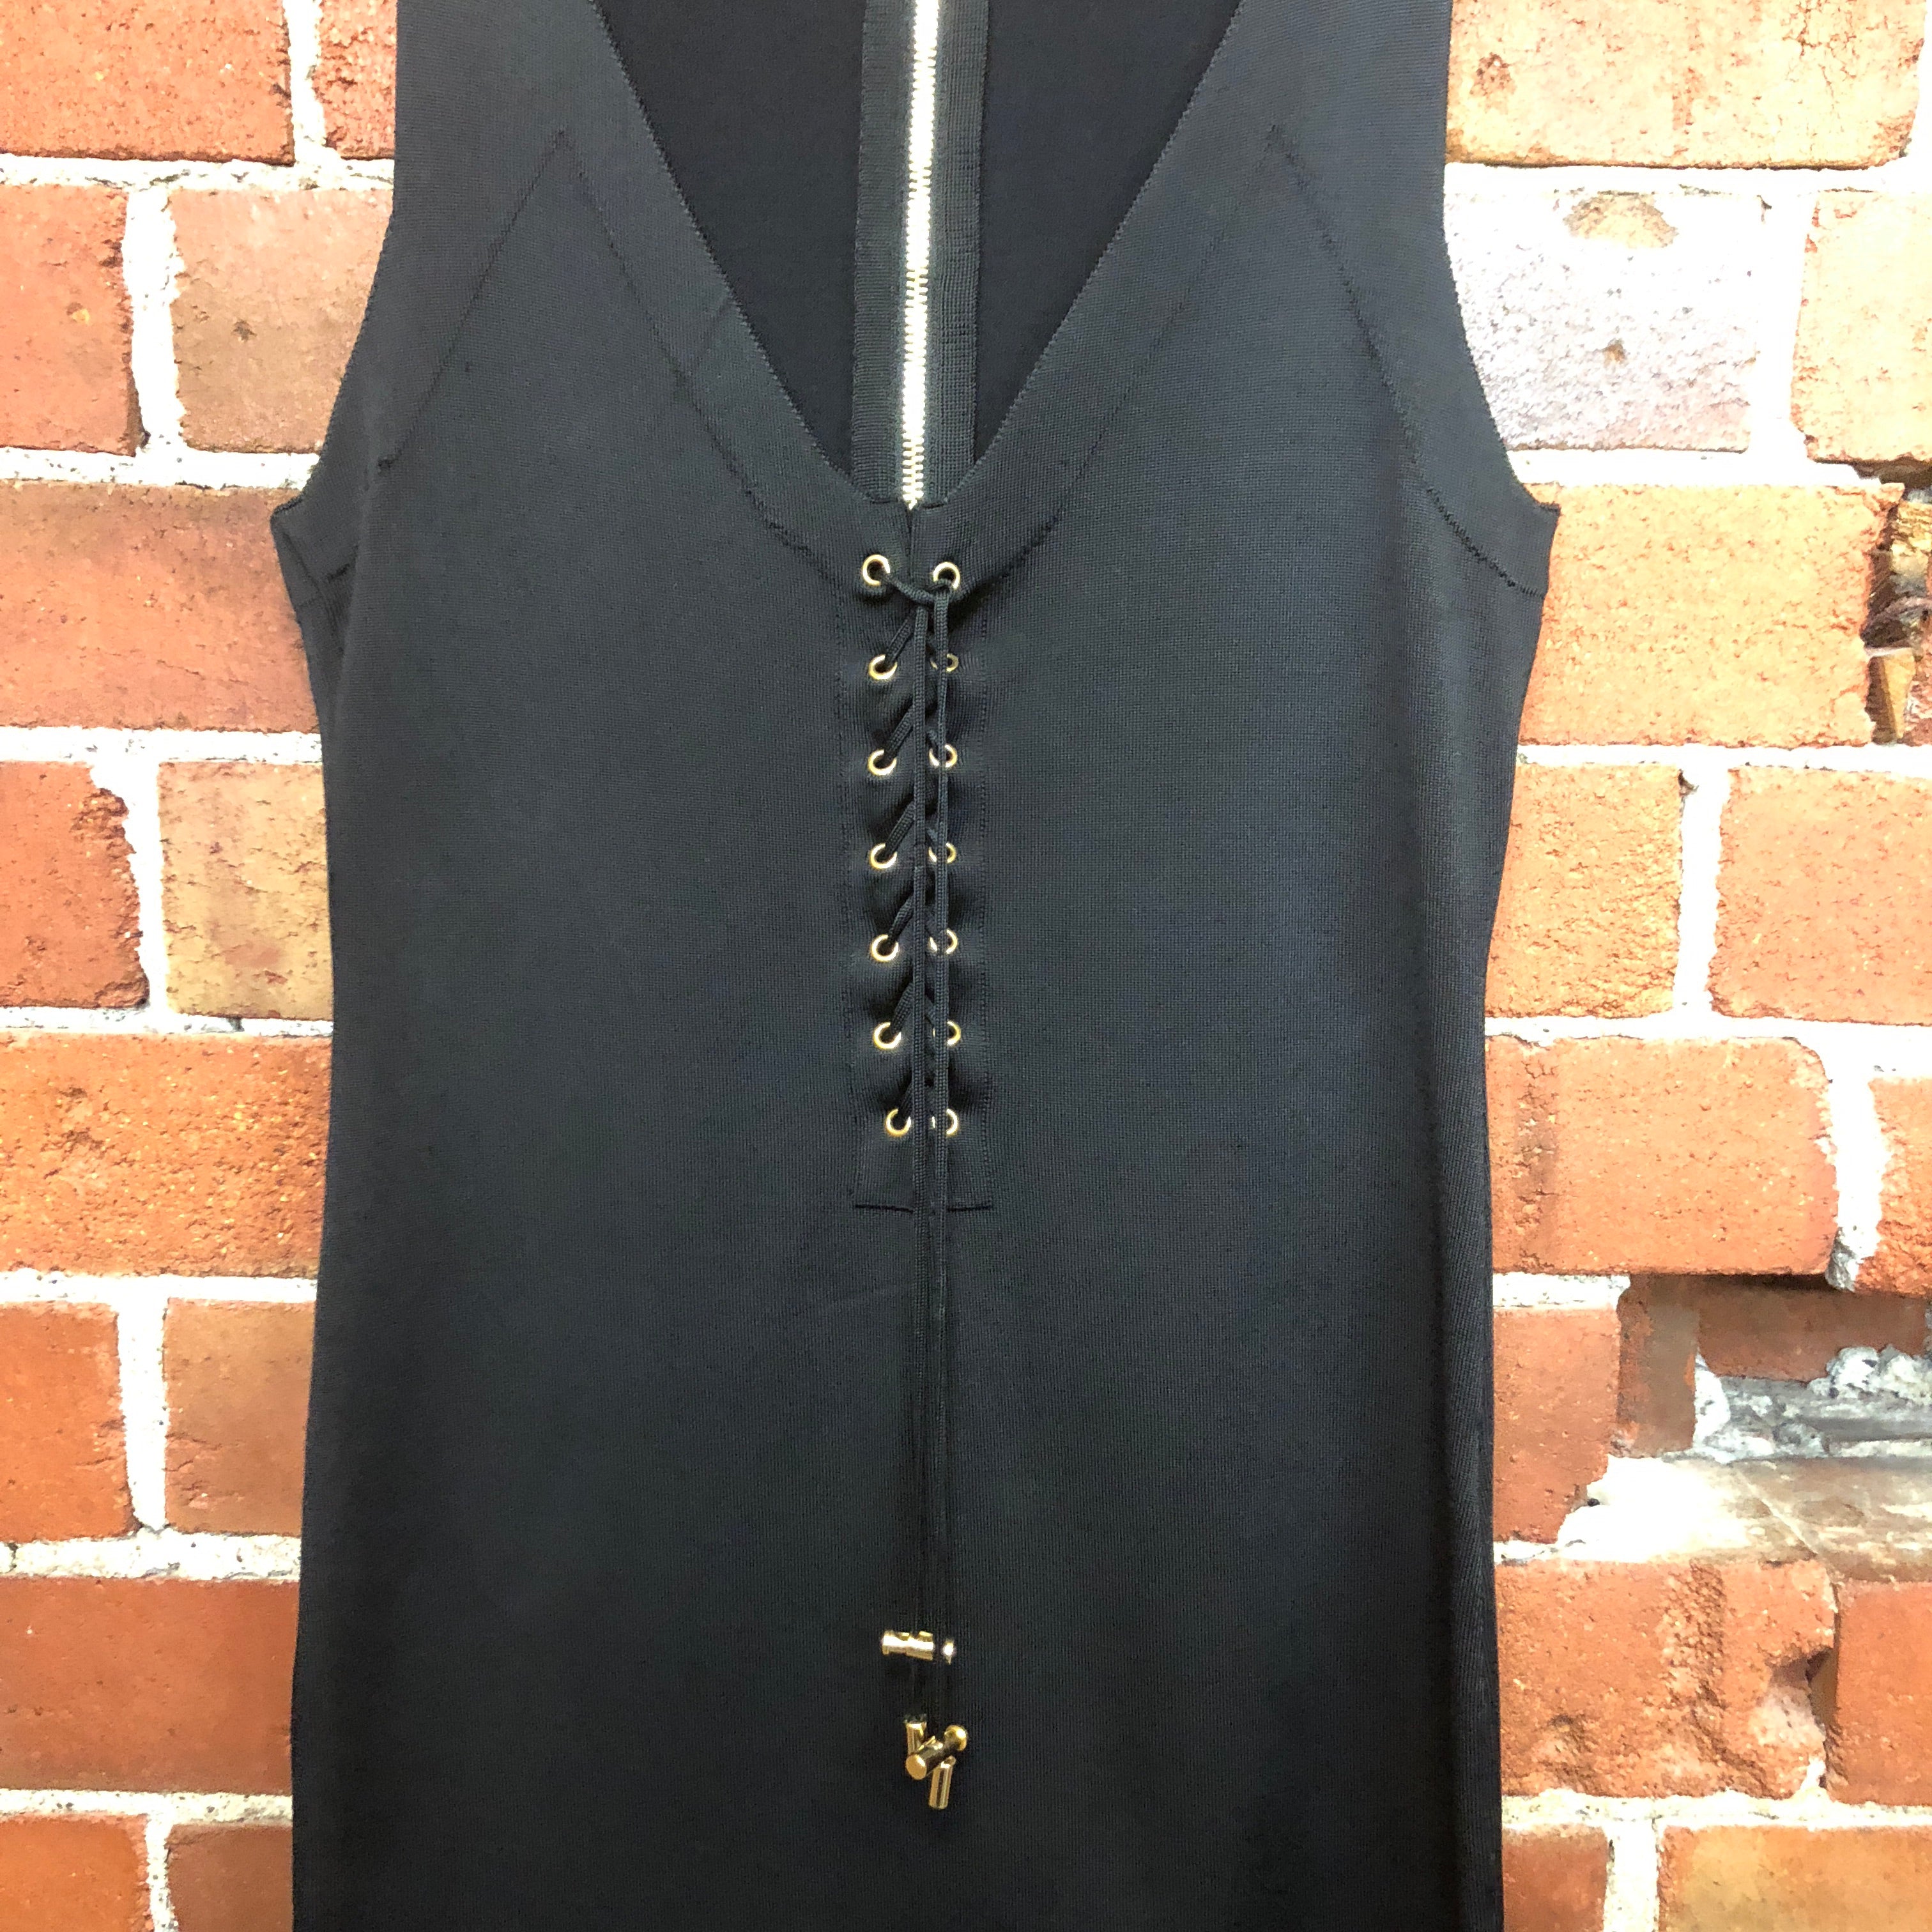 BALMAIN sexy LBD body con dress with lace up front